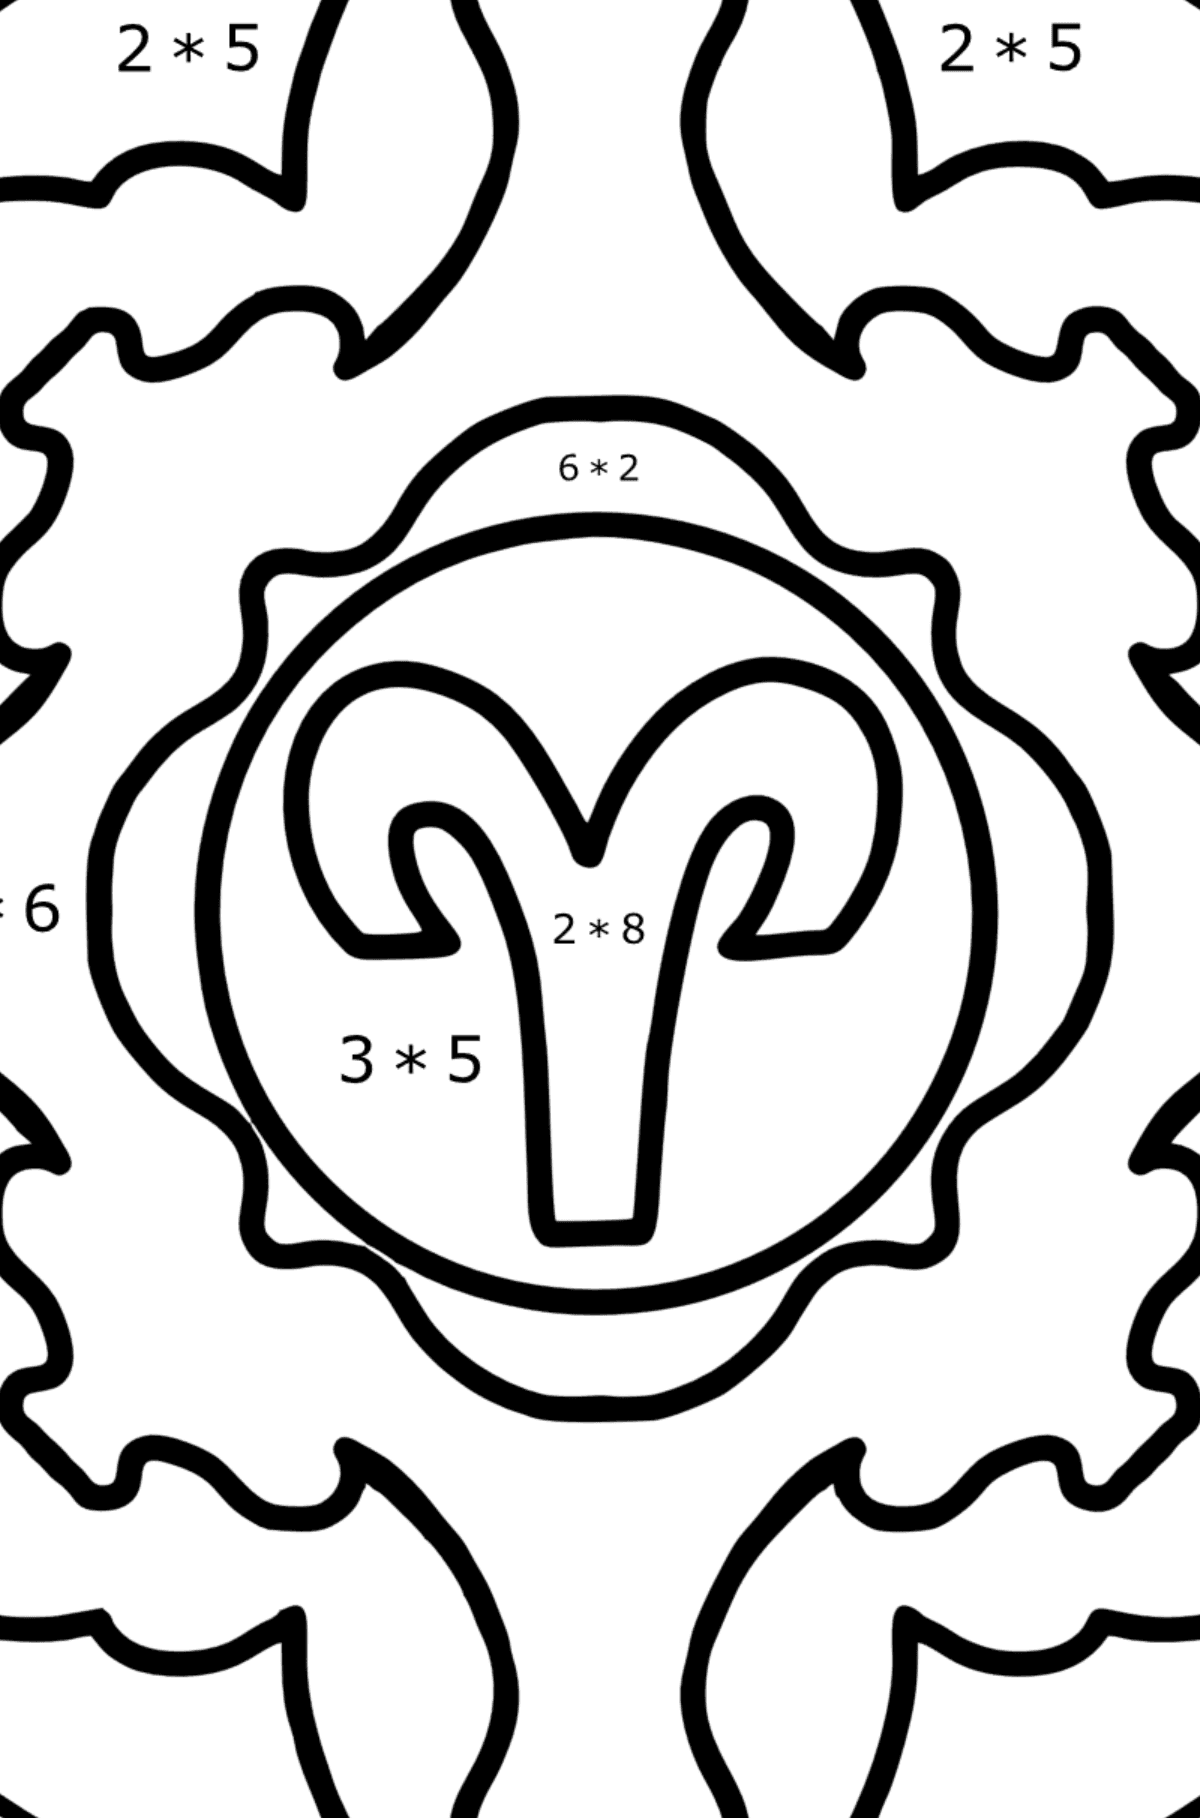 Coloring page - zodiac sign Aries - Math Coloring - Multiplication for Kids